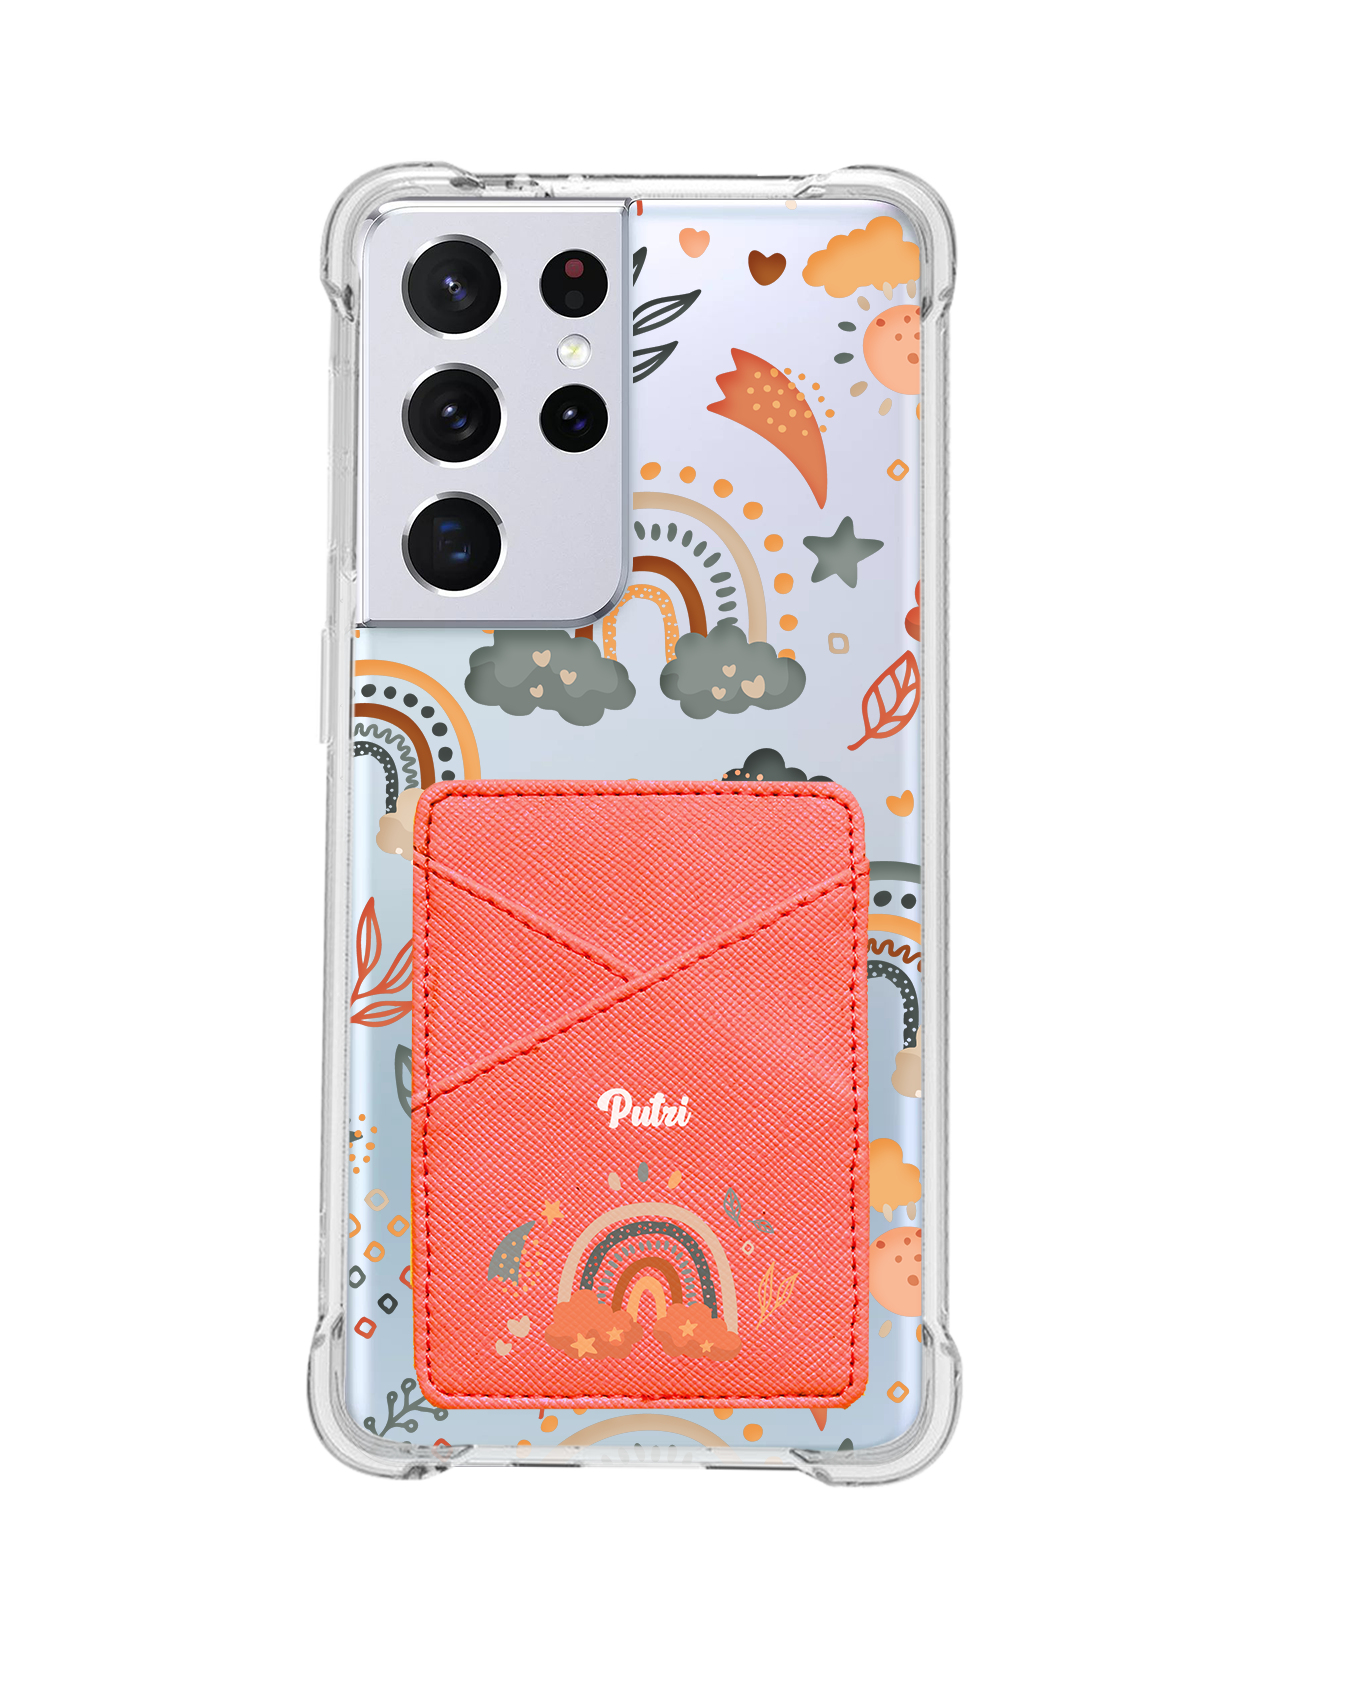 Android Phone Wallet Case - Boho 2.0